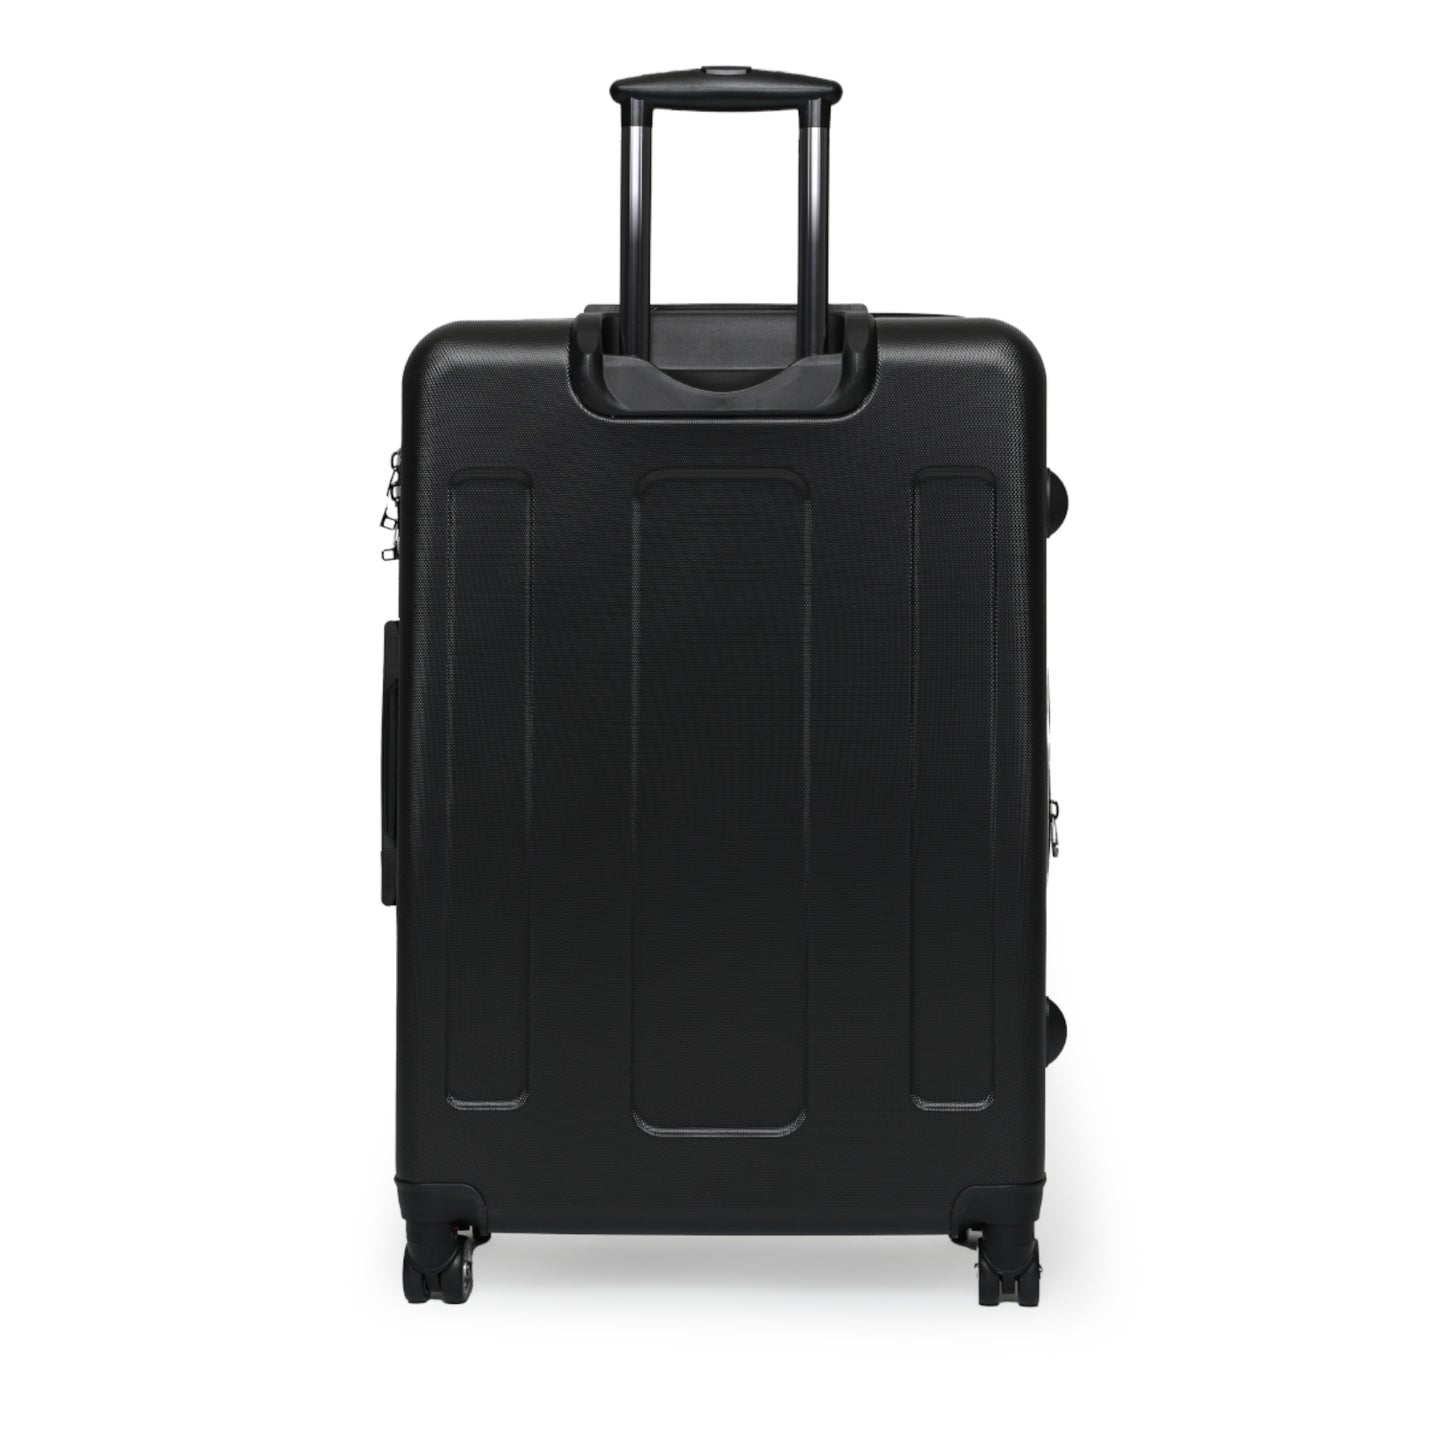 MARK ROTHKO - ABSTRACT - CARRY ON TRAVEL SUITCASE